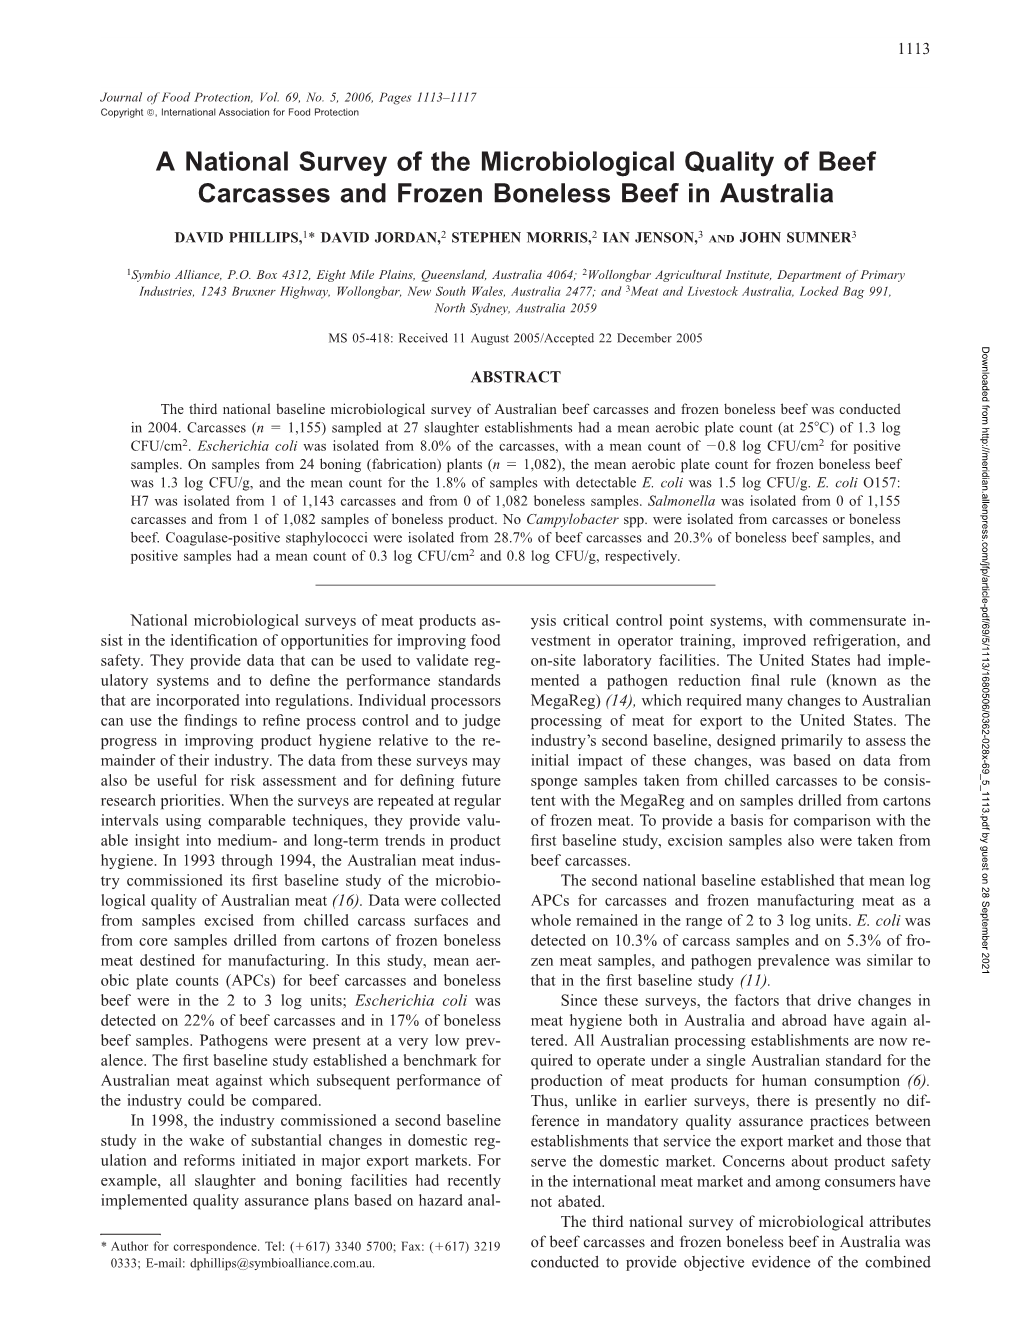 A National Survey of the Microbiological Quality of Beef Carcasses and Frozen Boneless Beef in Australia